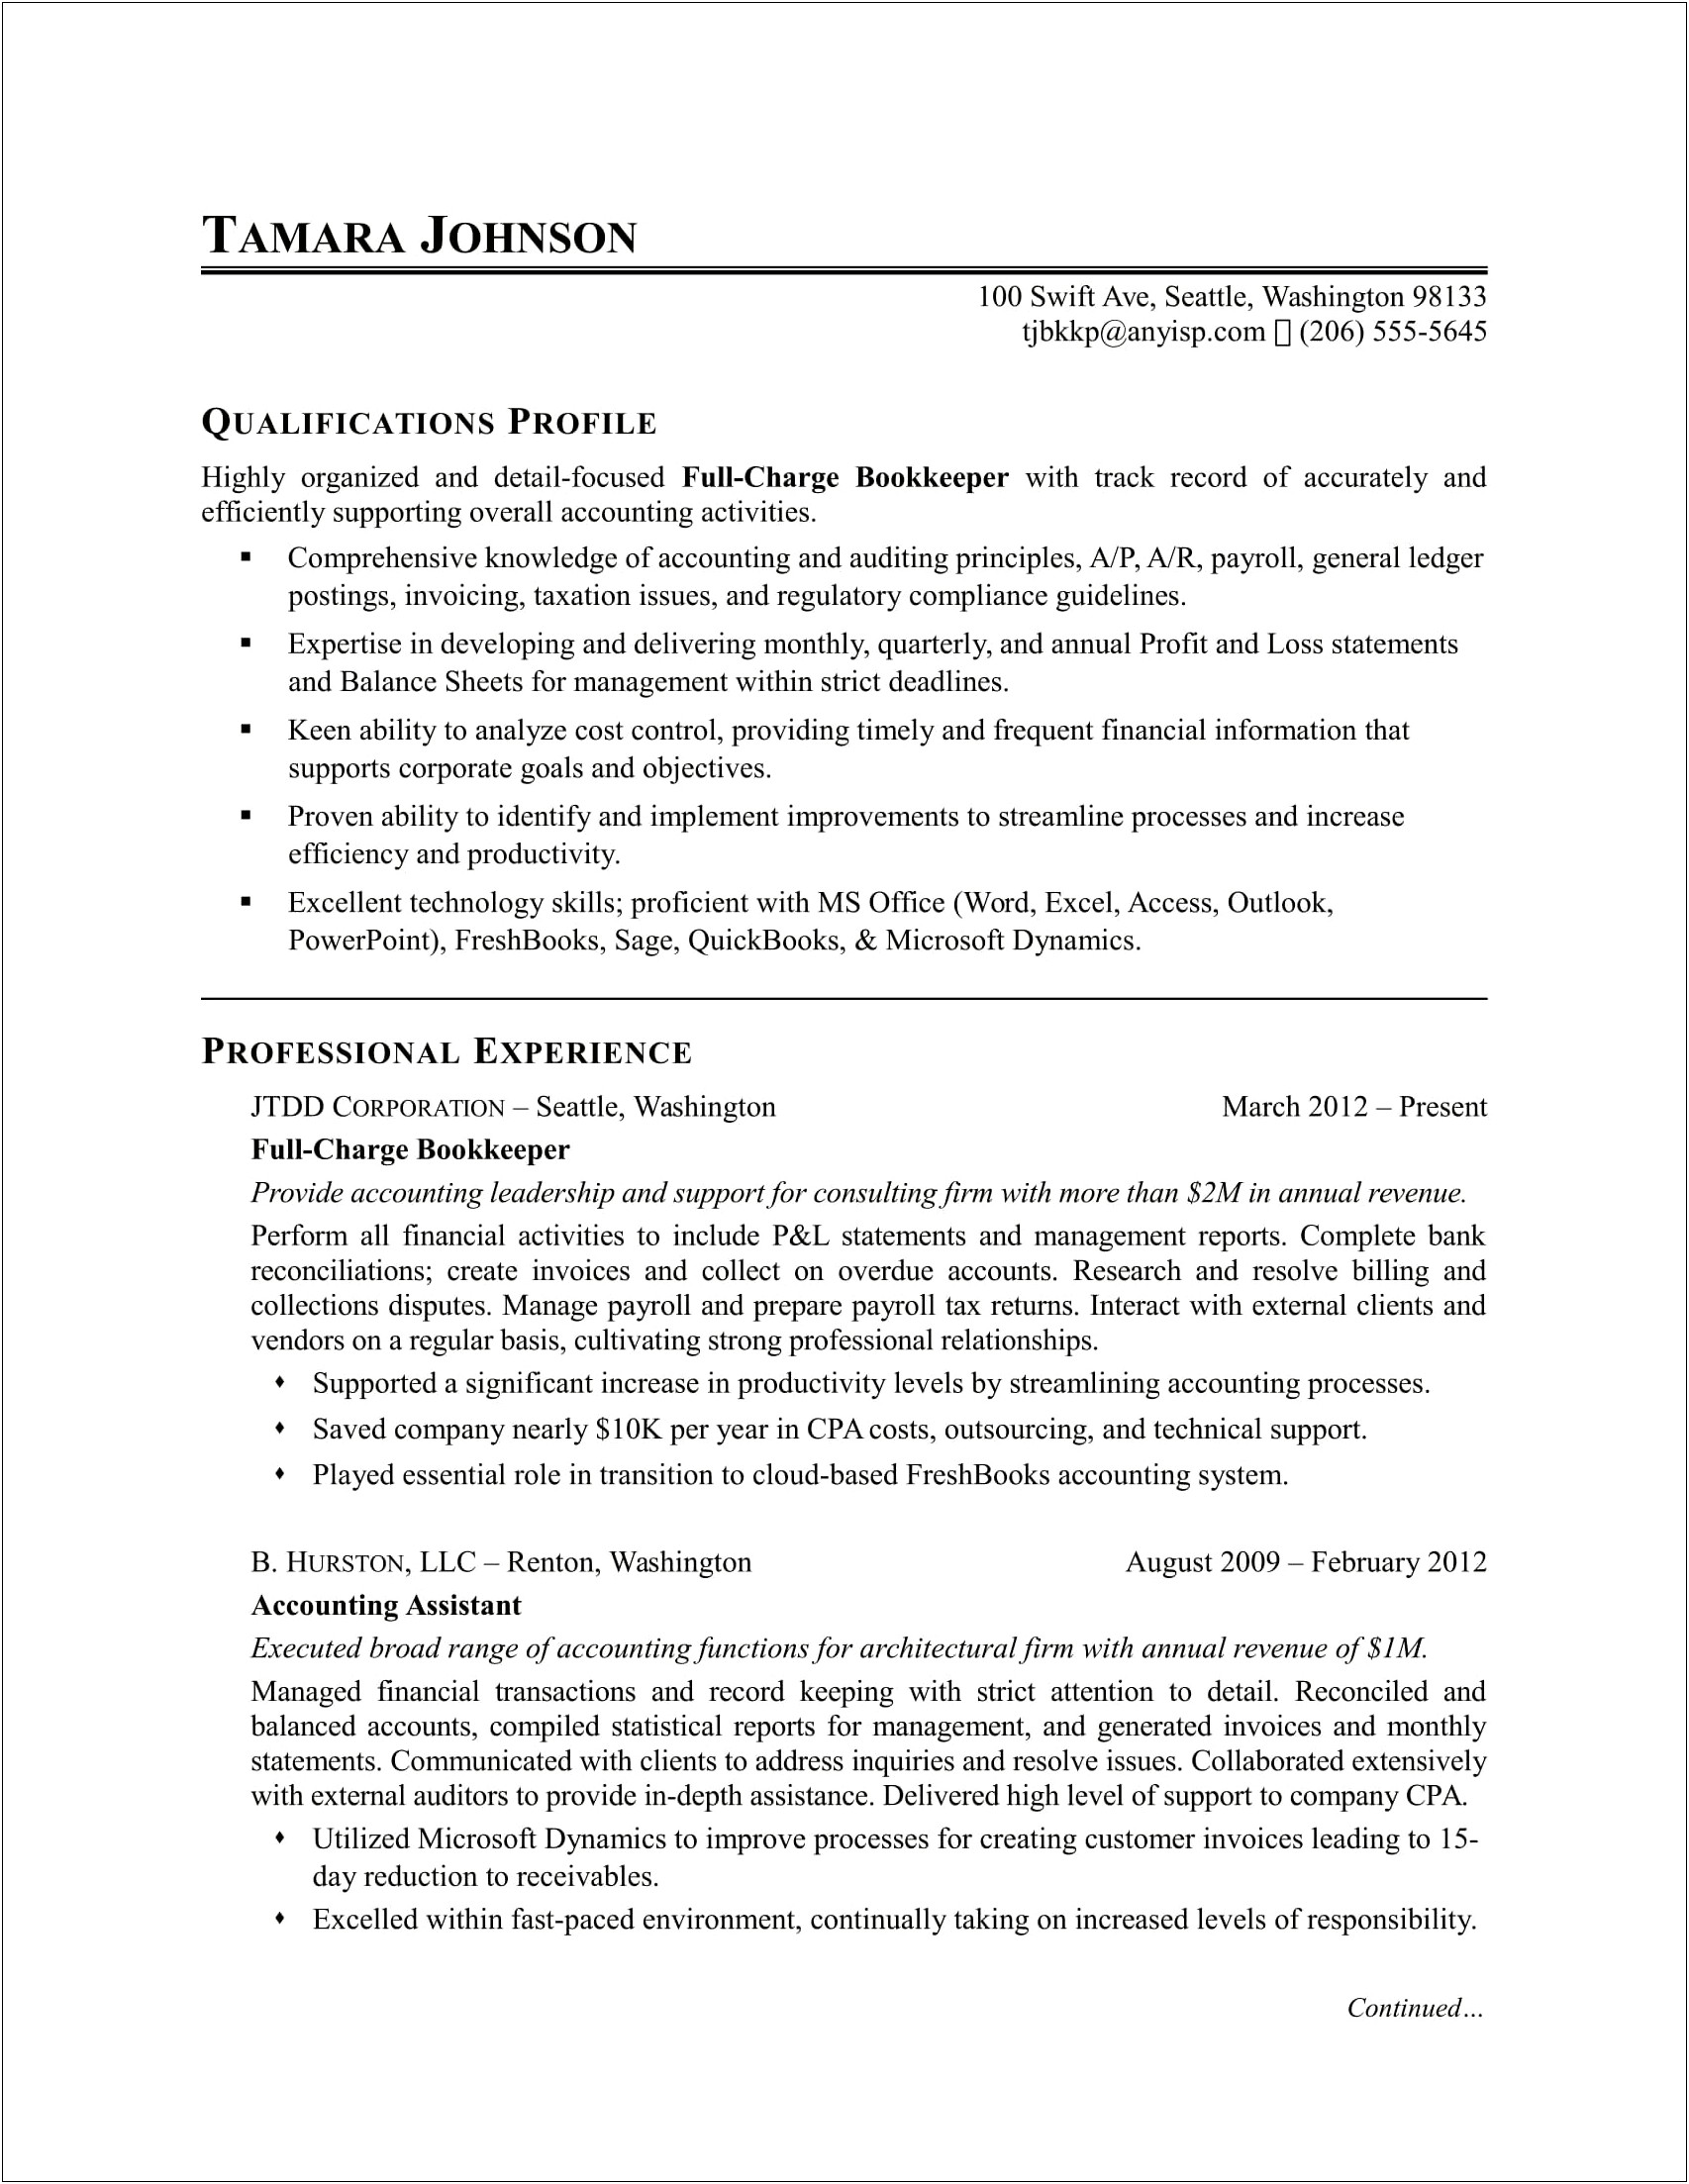 Resume Samples Showing Part Time Account Receivables Experience